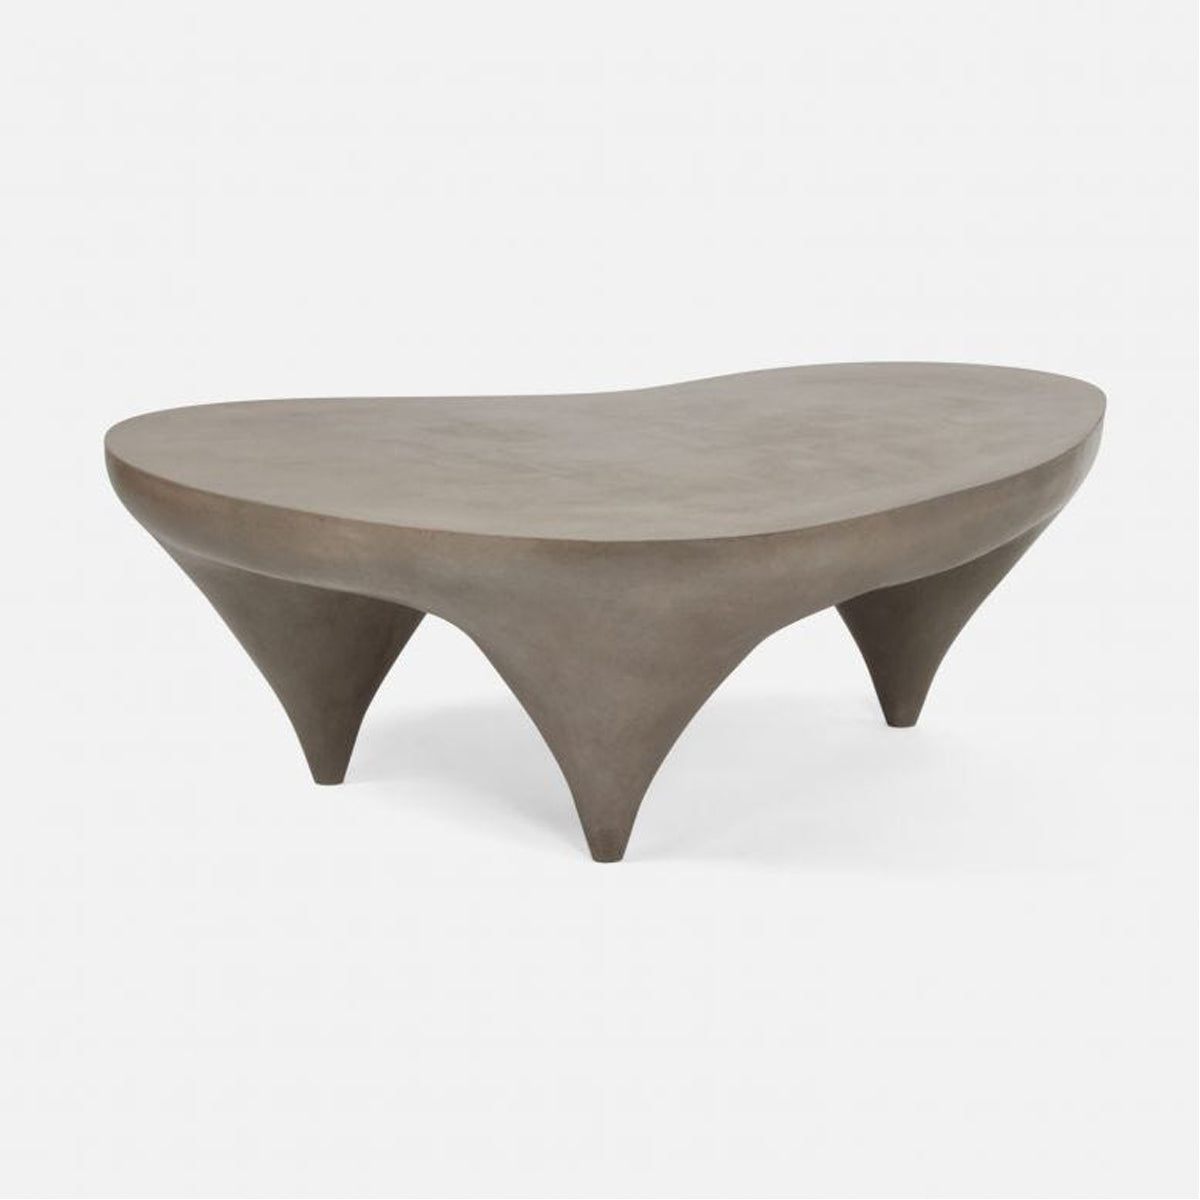 Made Goods Fairbanks Sculptural Outdoor Coffee Table